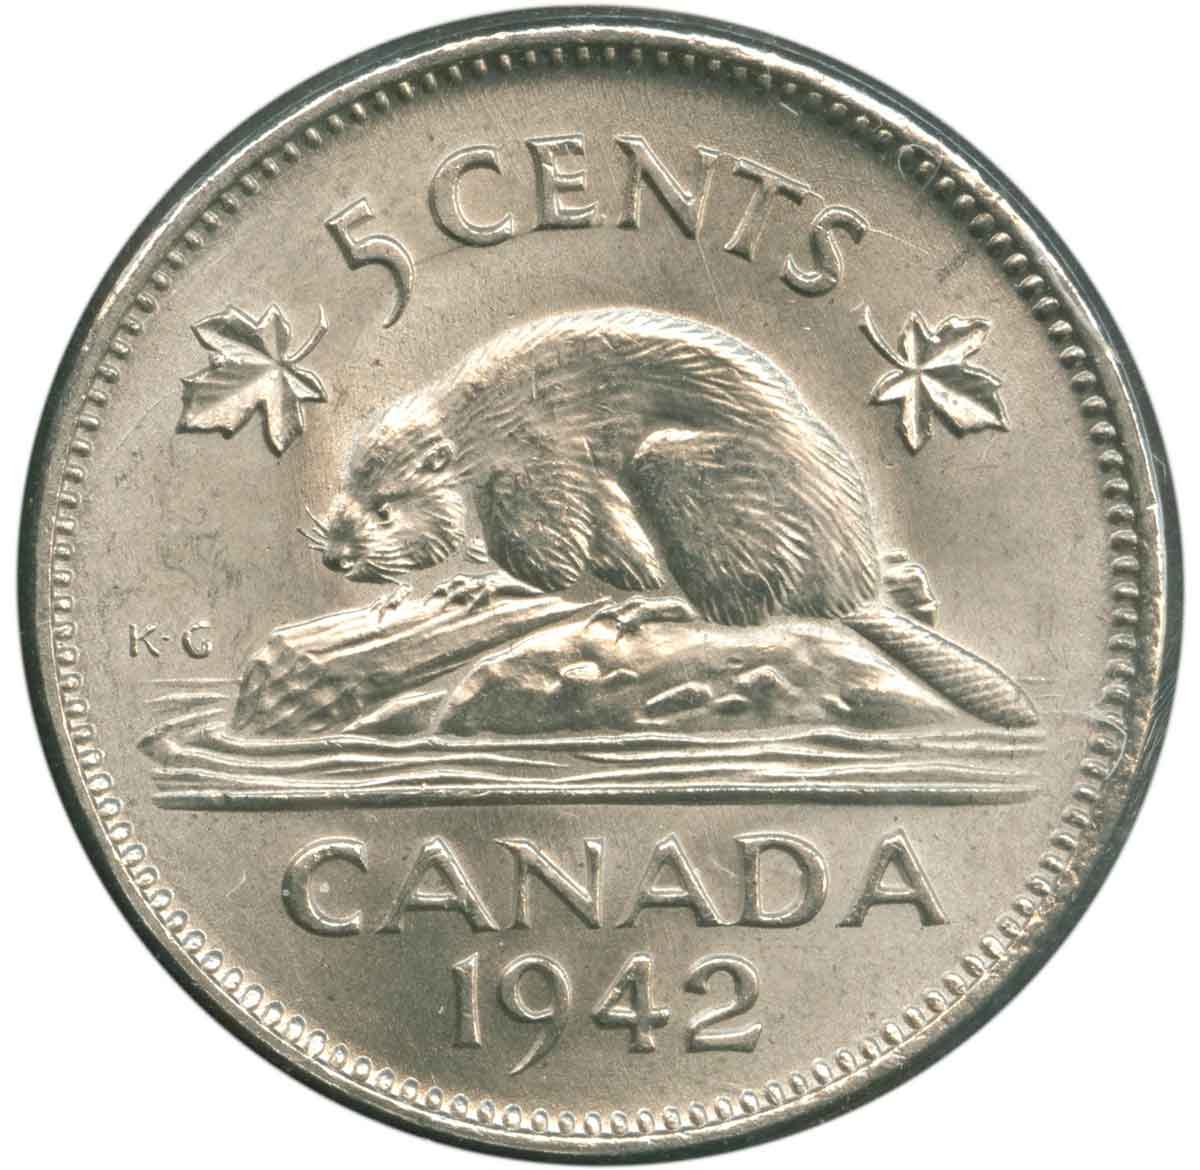 Canada’s Wartime Nickels of 1942-1945